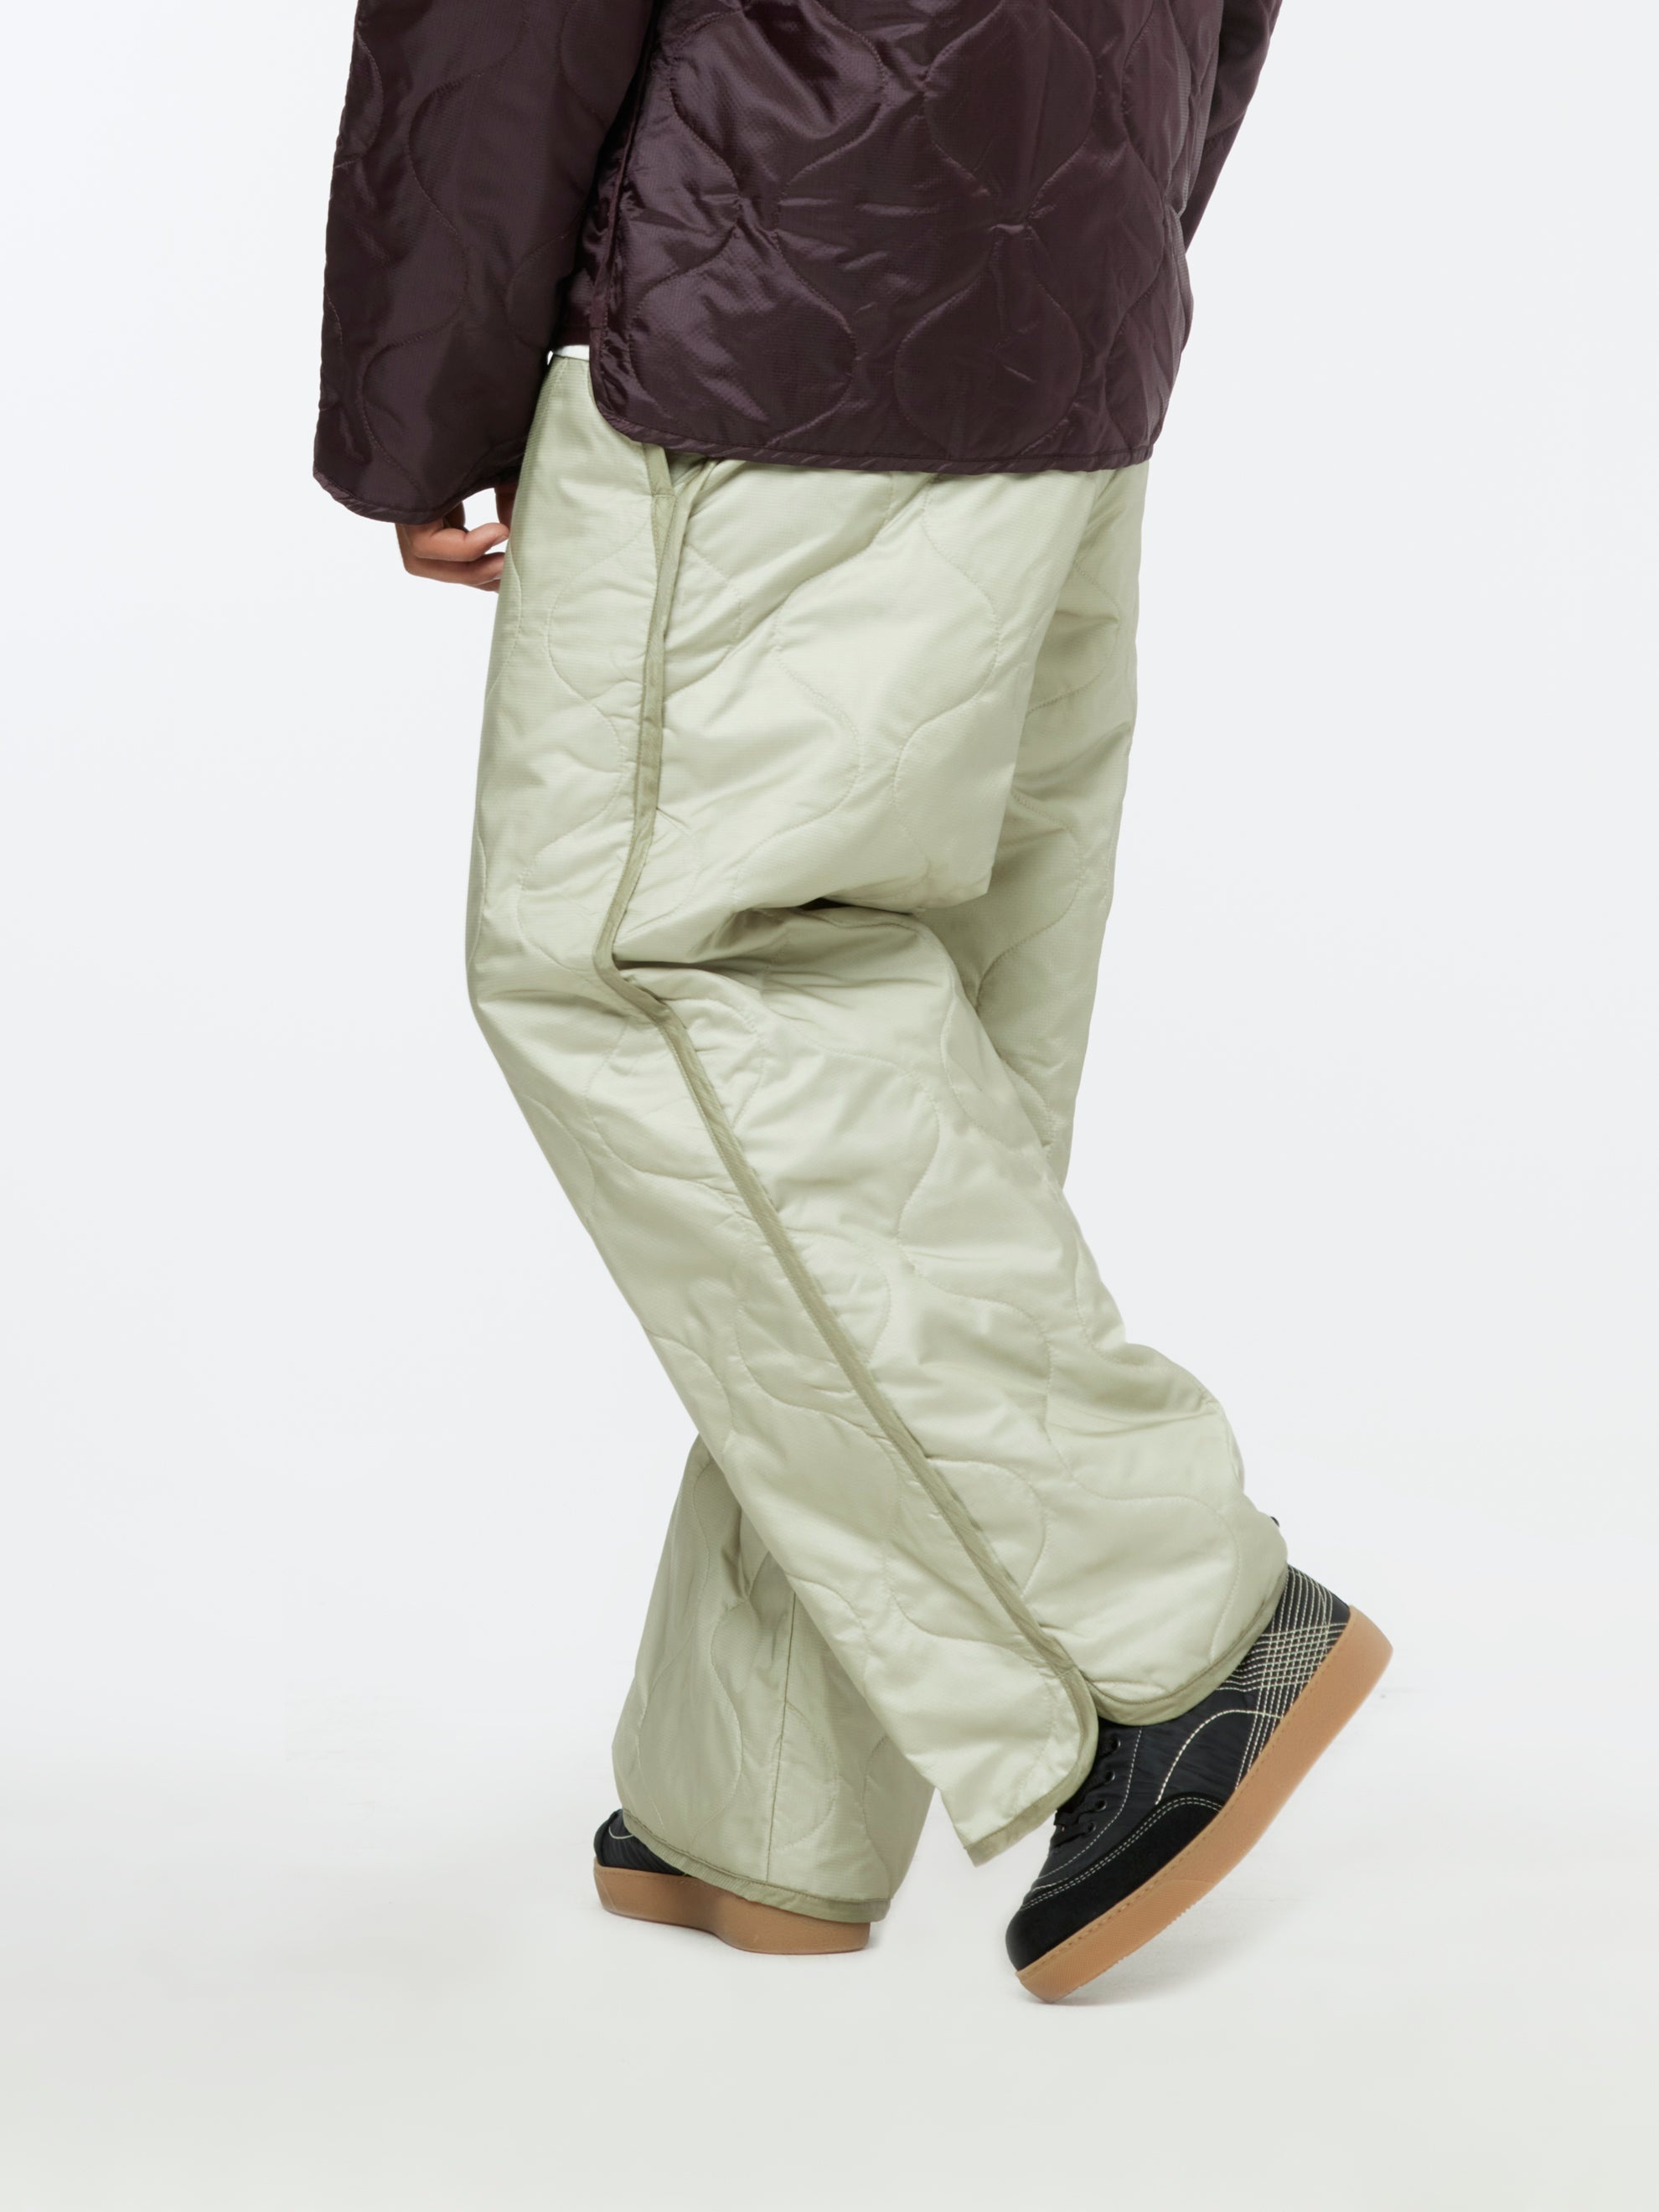 PANSBOURG RIPSPORT PANTS (SAND) - 3